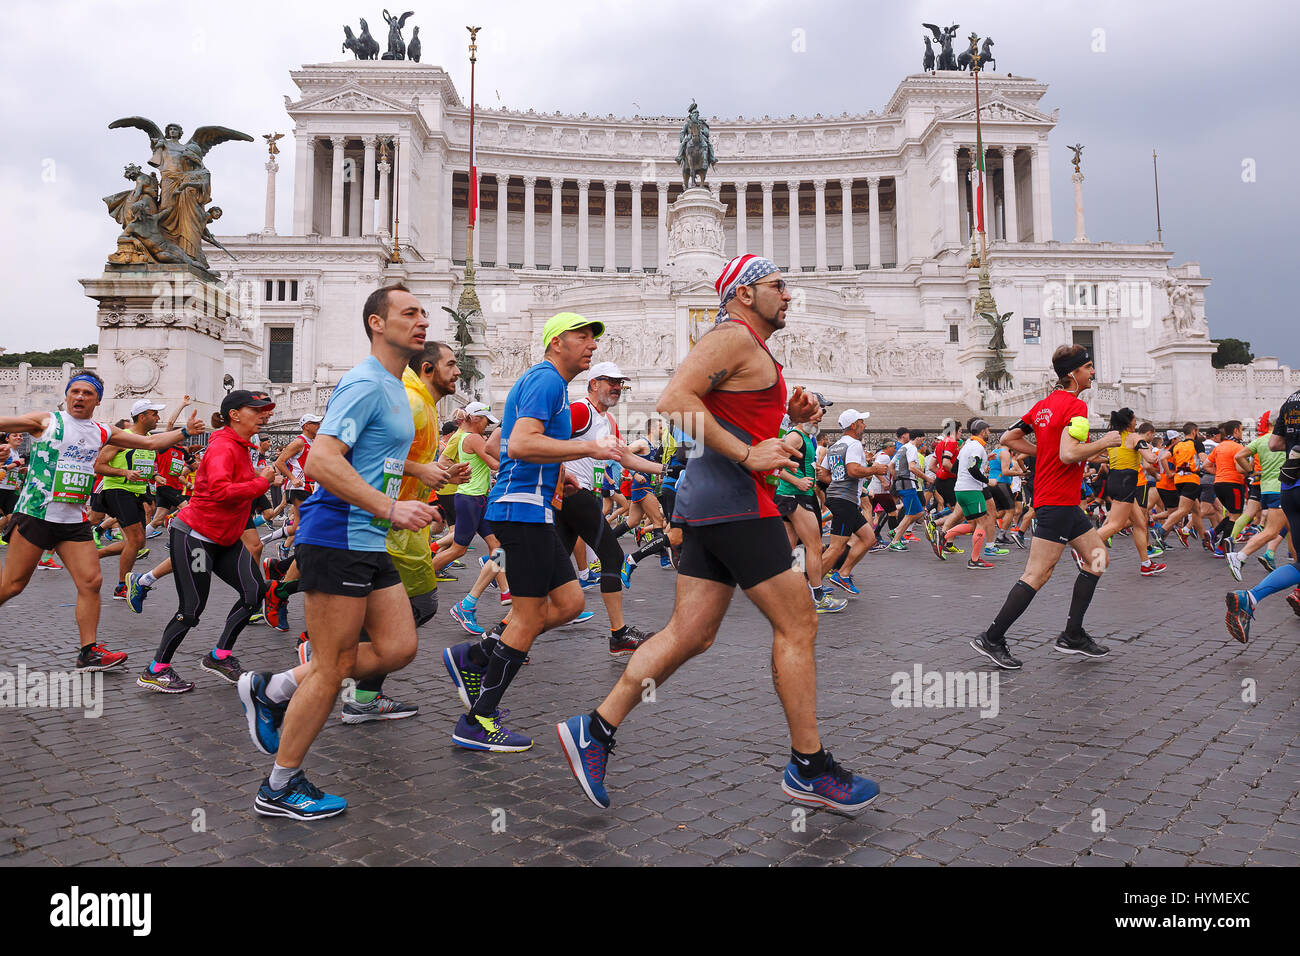 Rome, Italy - April 2, 2017: Athletes participating at the 23rd Rome marathon run through the street circuit passing in front of the altar of the home Stock Photo